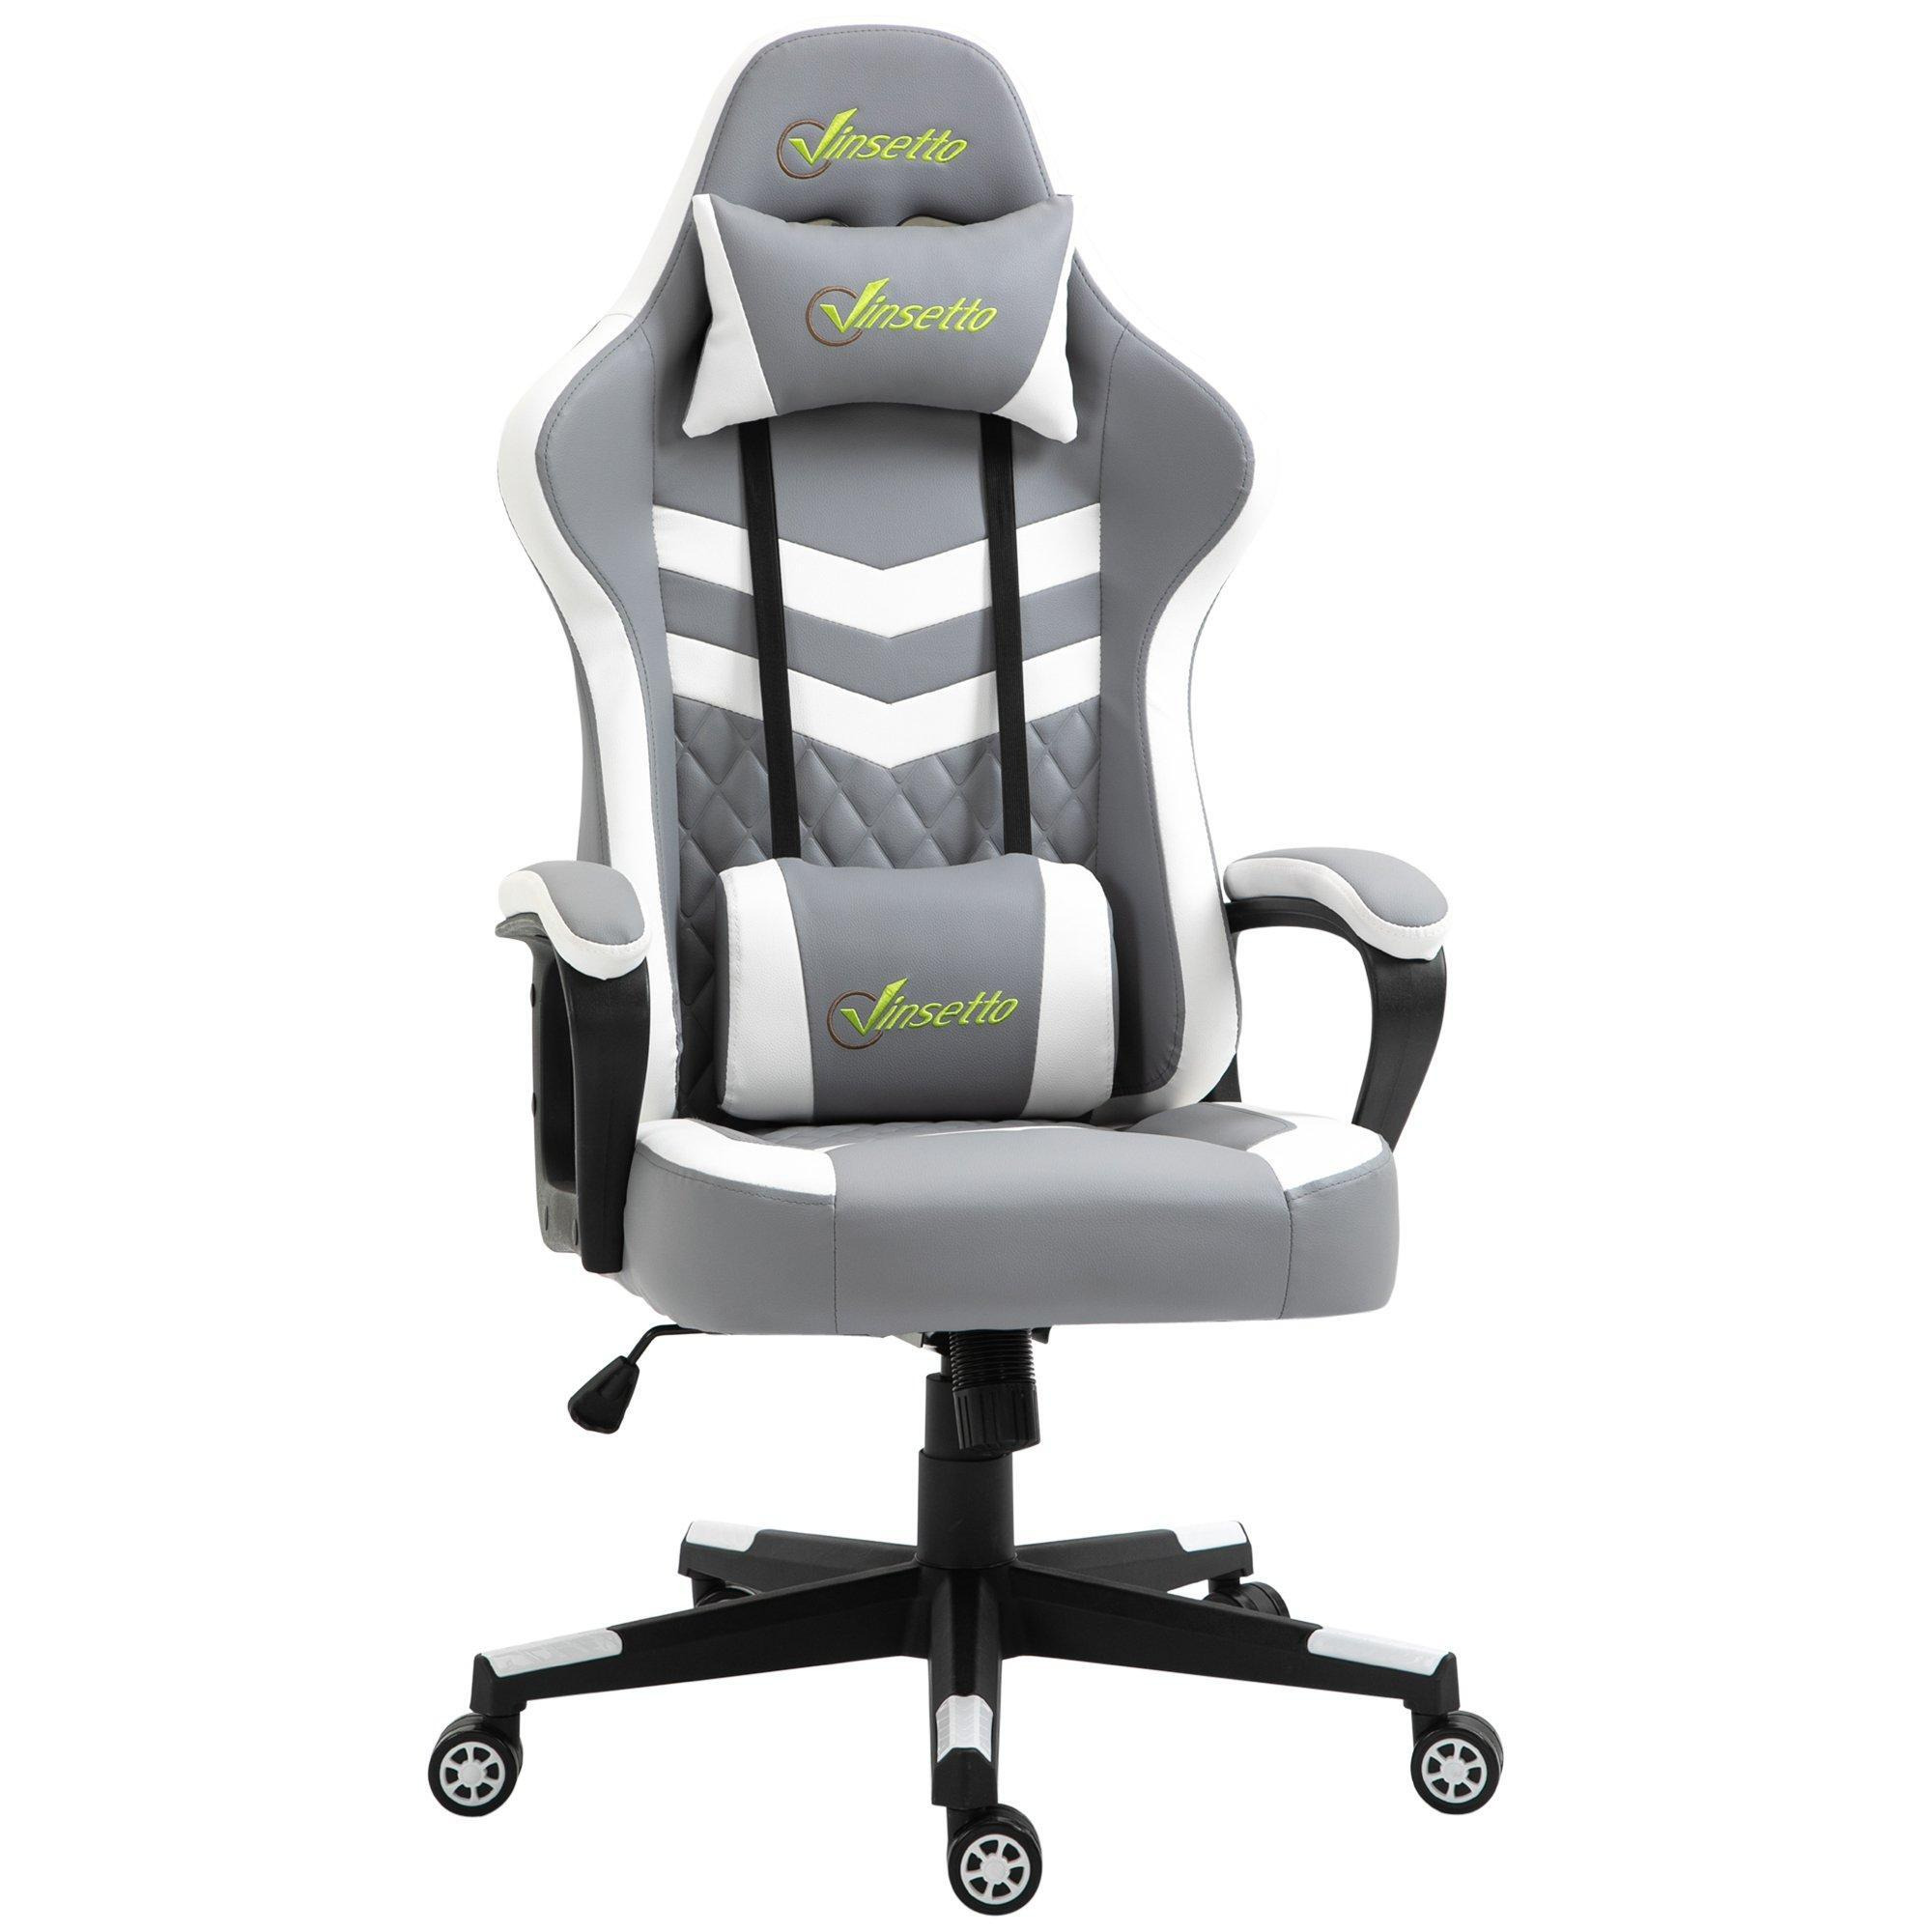 Racing Gaming Chair with Lumbar Support, Headrest, Gamer Office Chair - image 1